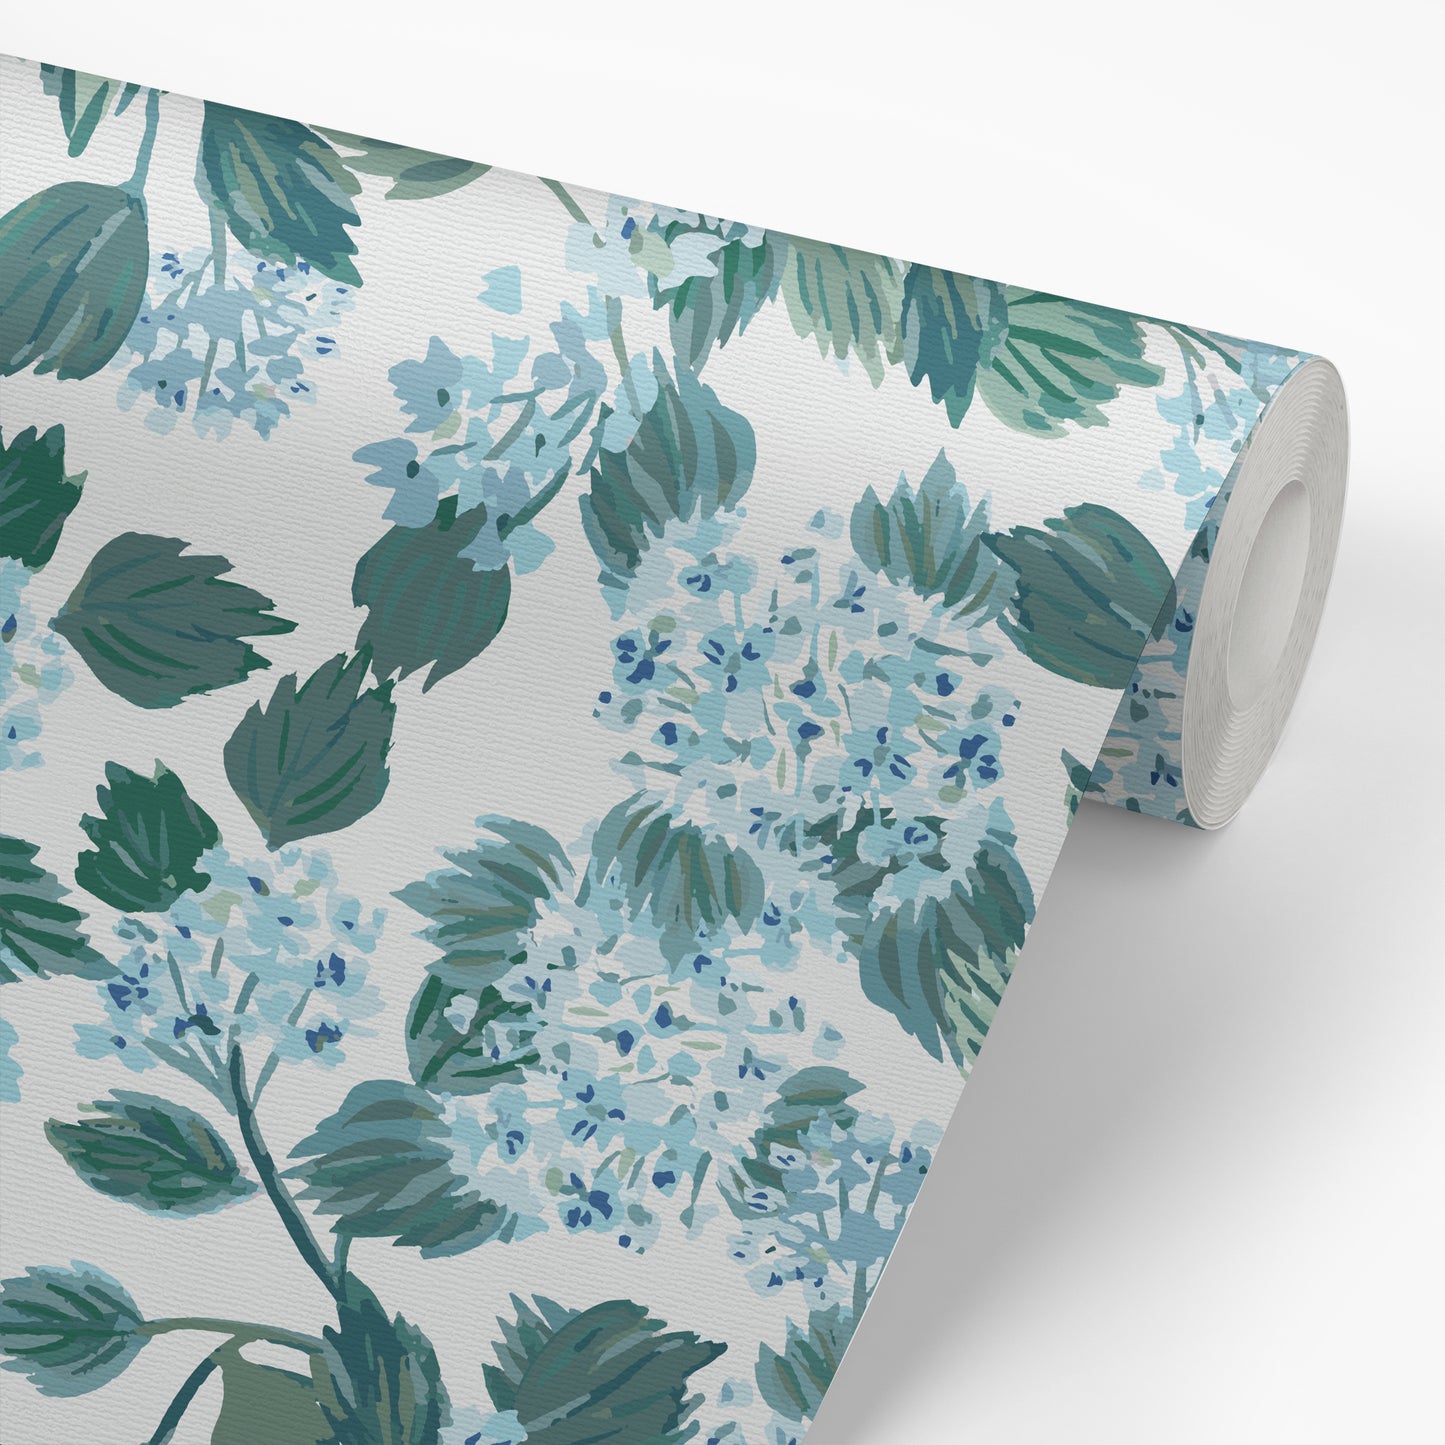 Roll of designer quality wallpaper with blue floral and green leaves design